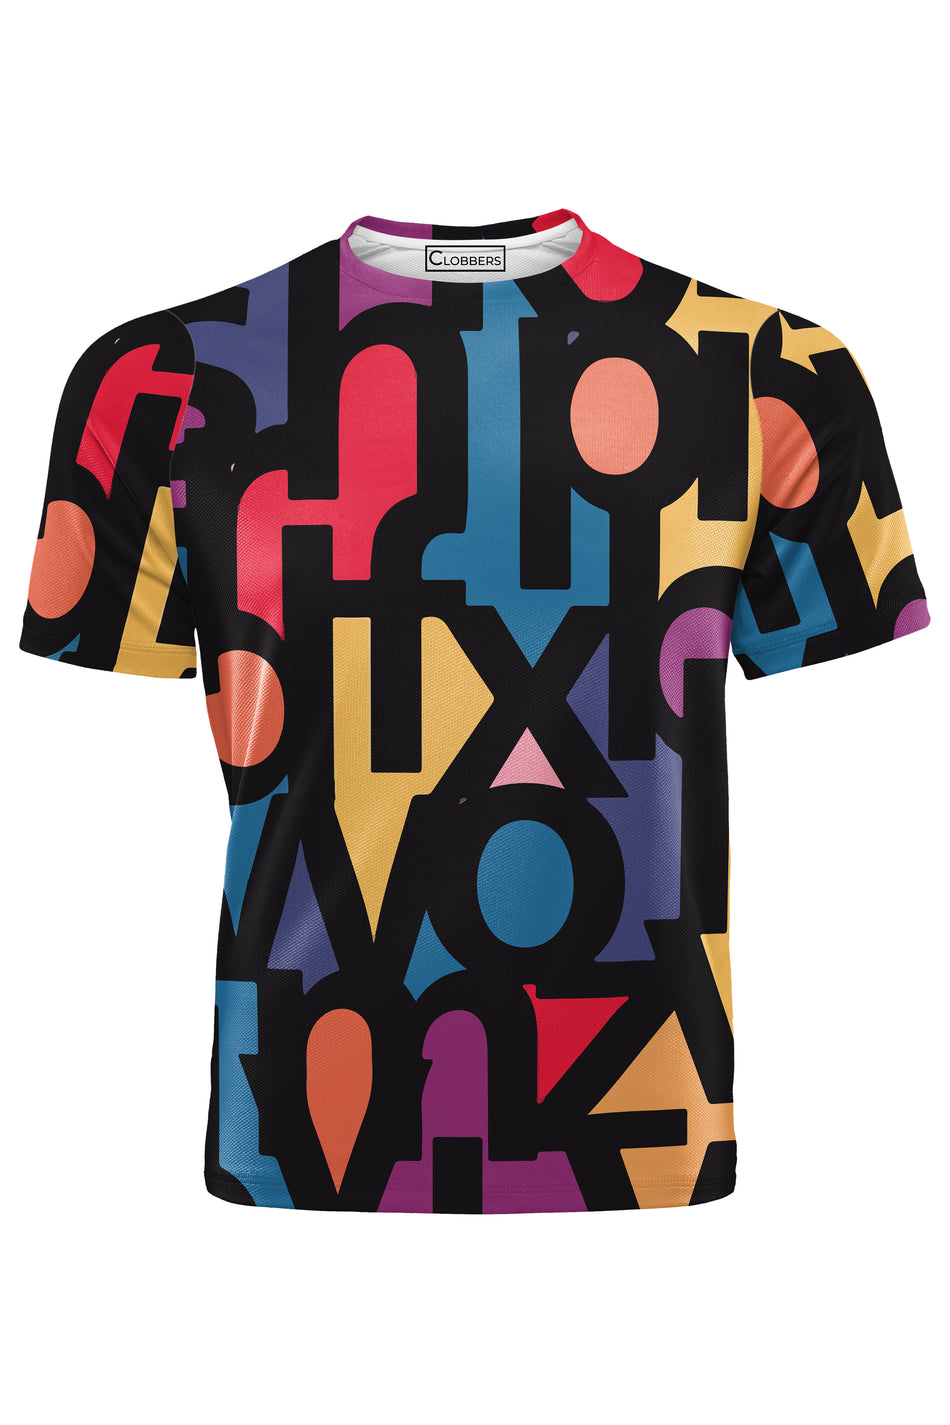 AOUT - COLORFULL ALPHABETS TSHIRT